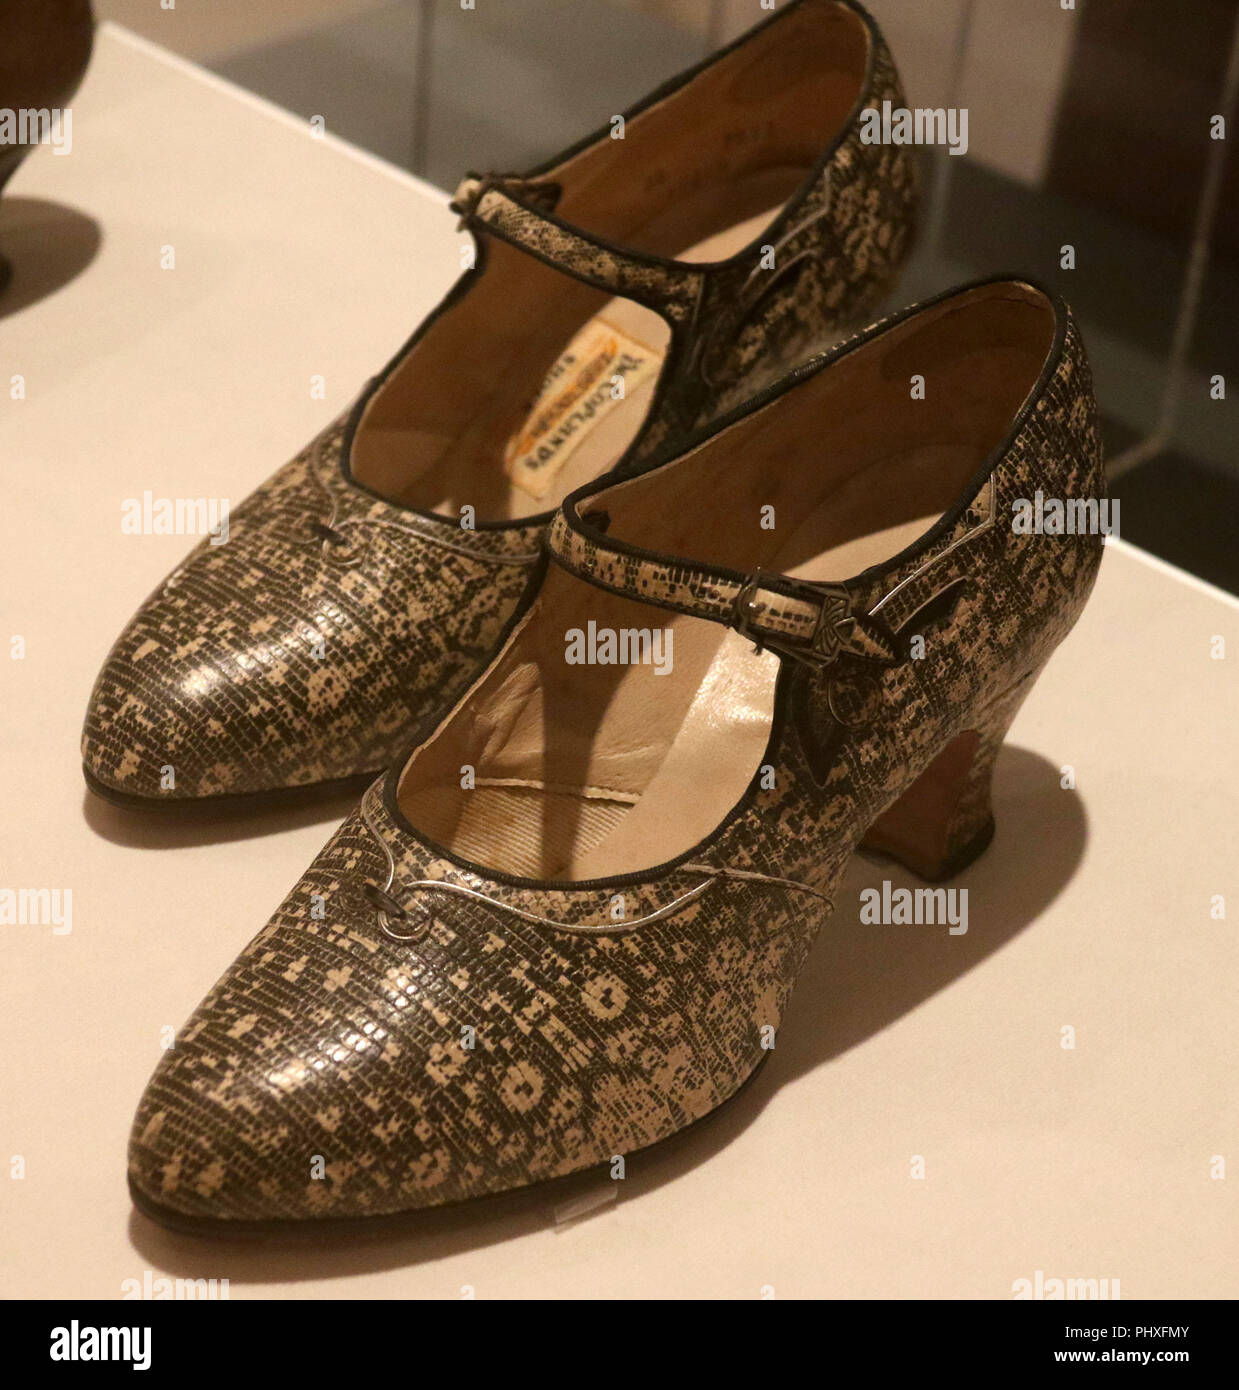 New York City, New York, USA. 2nd Sep, 2018. Dr. Copeland's Light Weight Shoes, 'Mary Jane' shoes ca. 1920's, made with snakeskin and kid leather, seen in the exhibit 'Walk This Way', shoes from the Stuart Weitzman collection held at the New York Historical Society. Credit: Nancy Kaszerman/ZUMA Wire/Alamy Live News Stock Photo